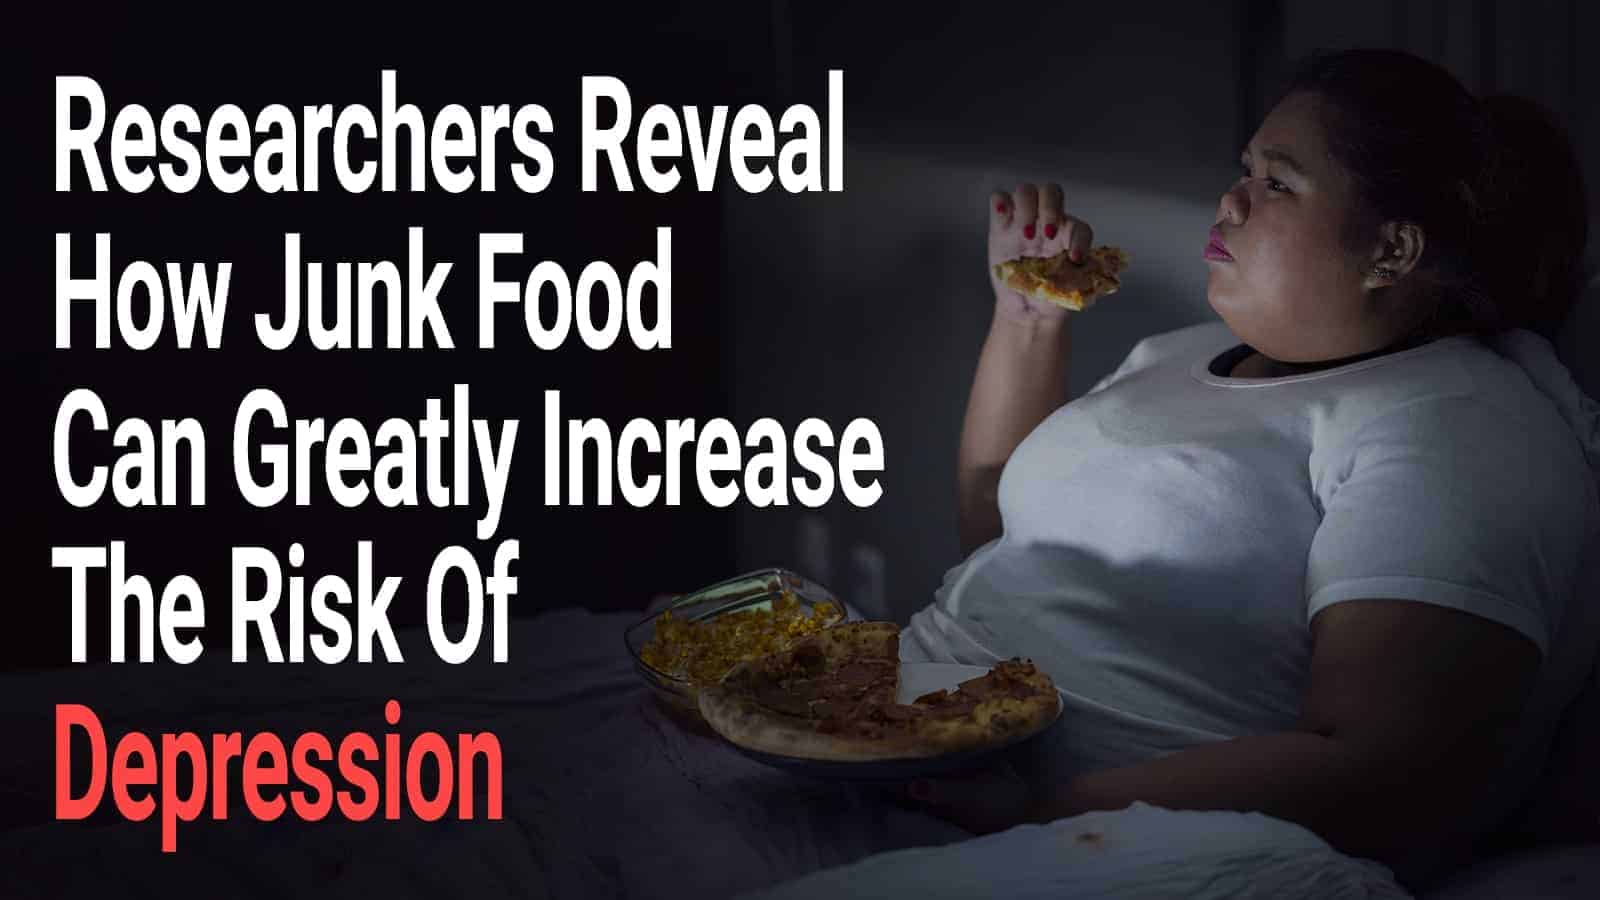 Researchers Reveal How Junk Food Can Greatly Increase The Risk Of Depression